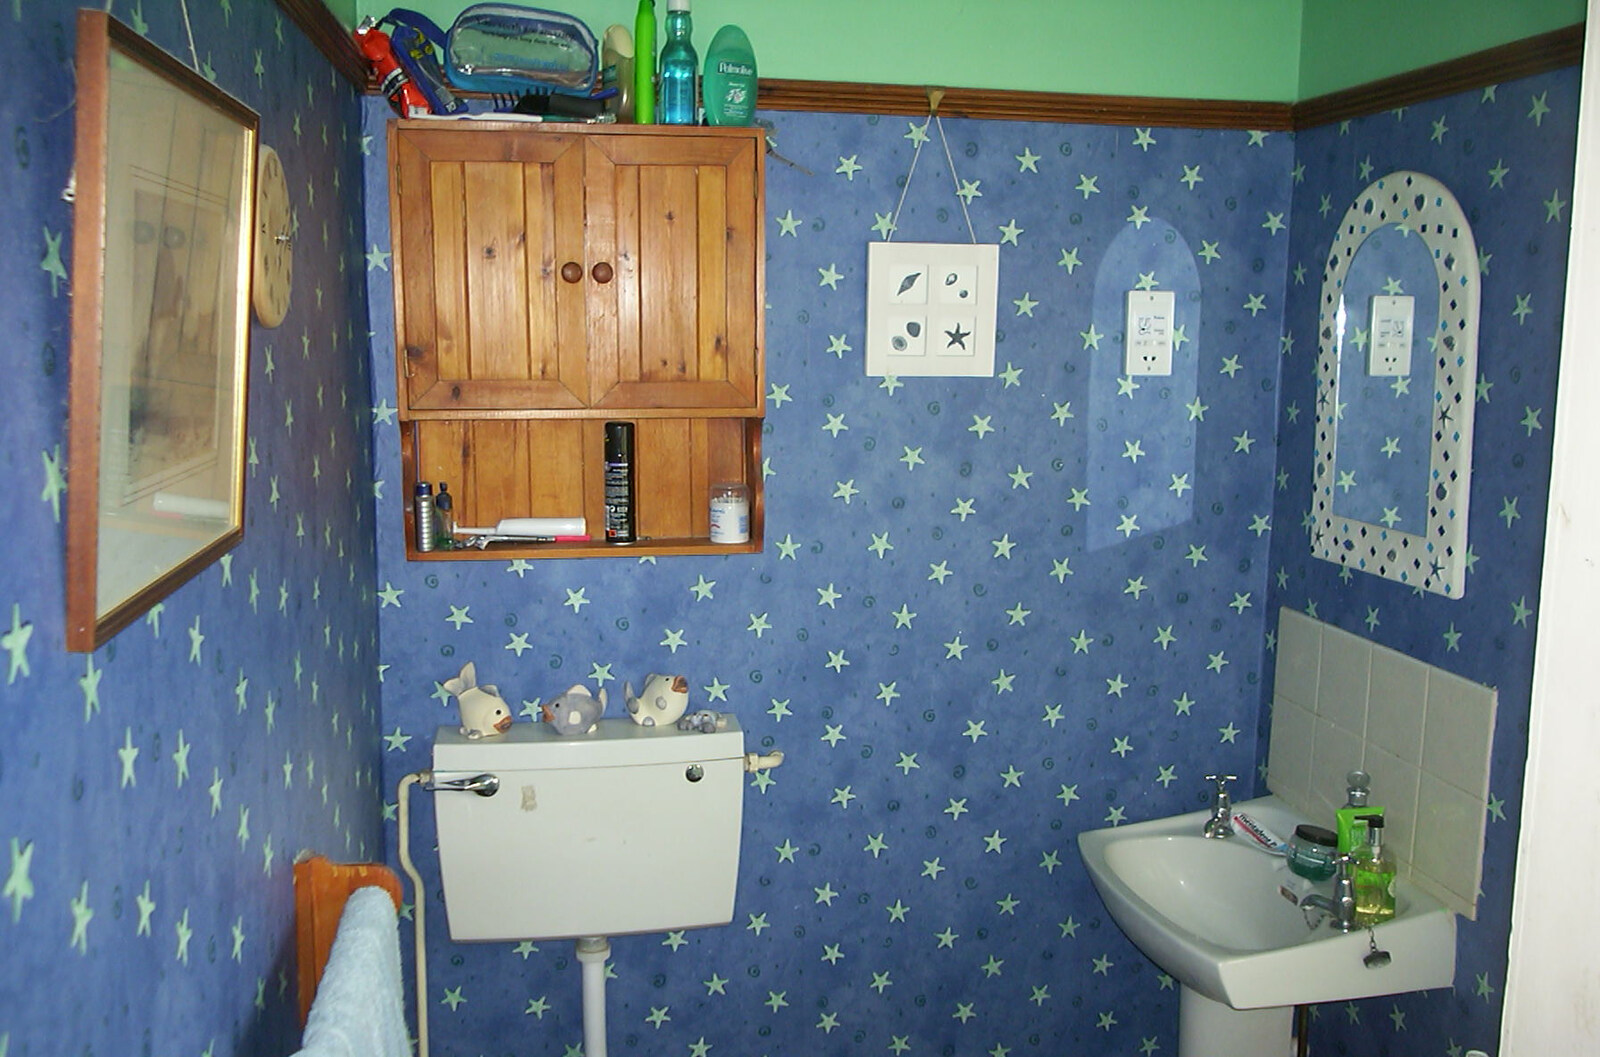 Spammy's Barbeque and A Summer Miscellany - 1st June 2002: The bathroom has a new starry colour scheme